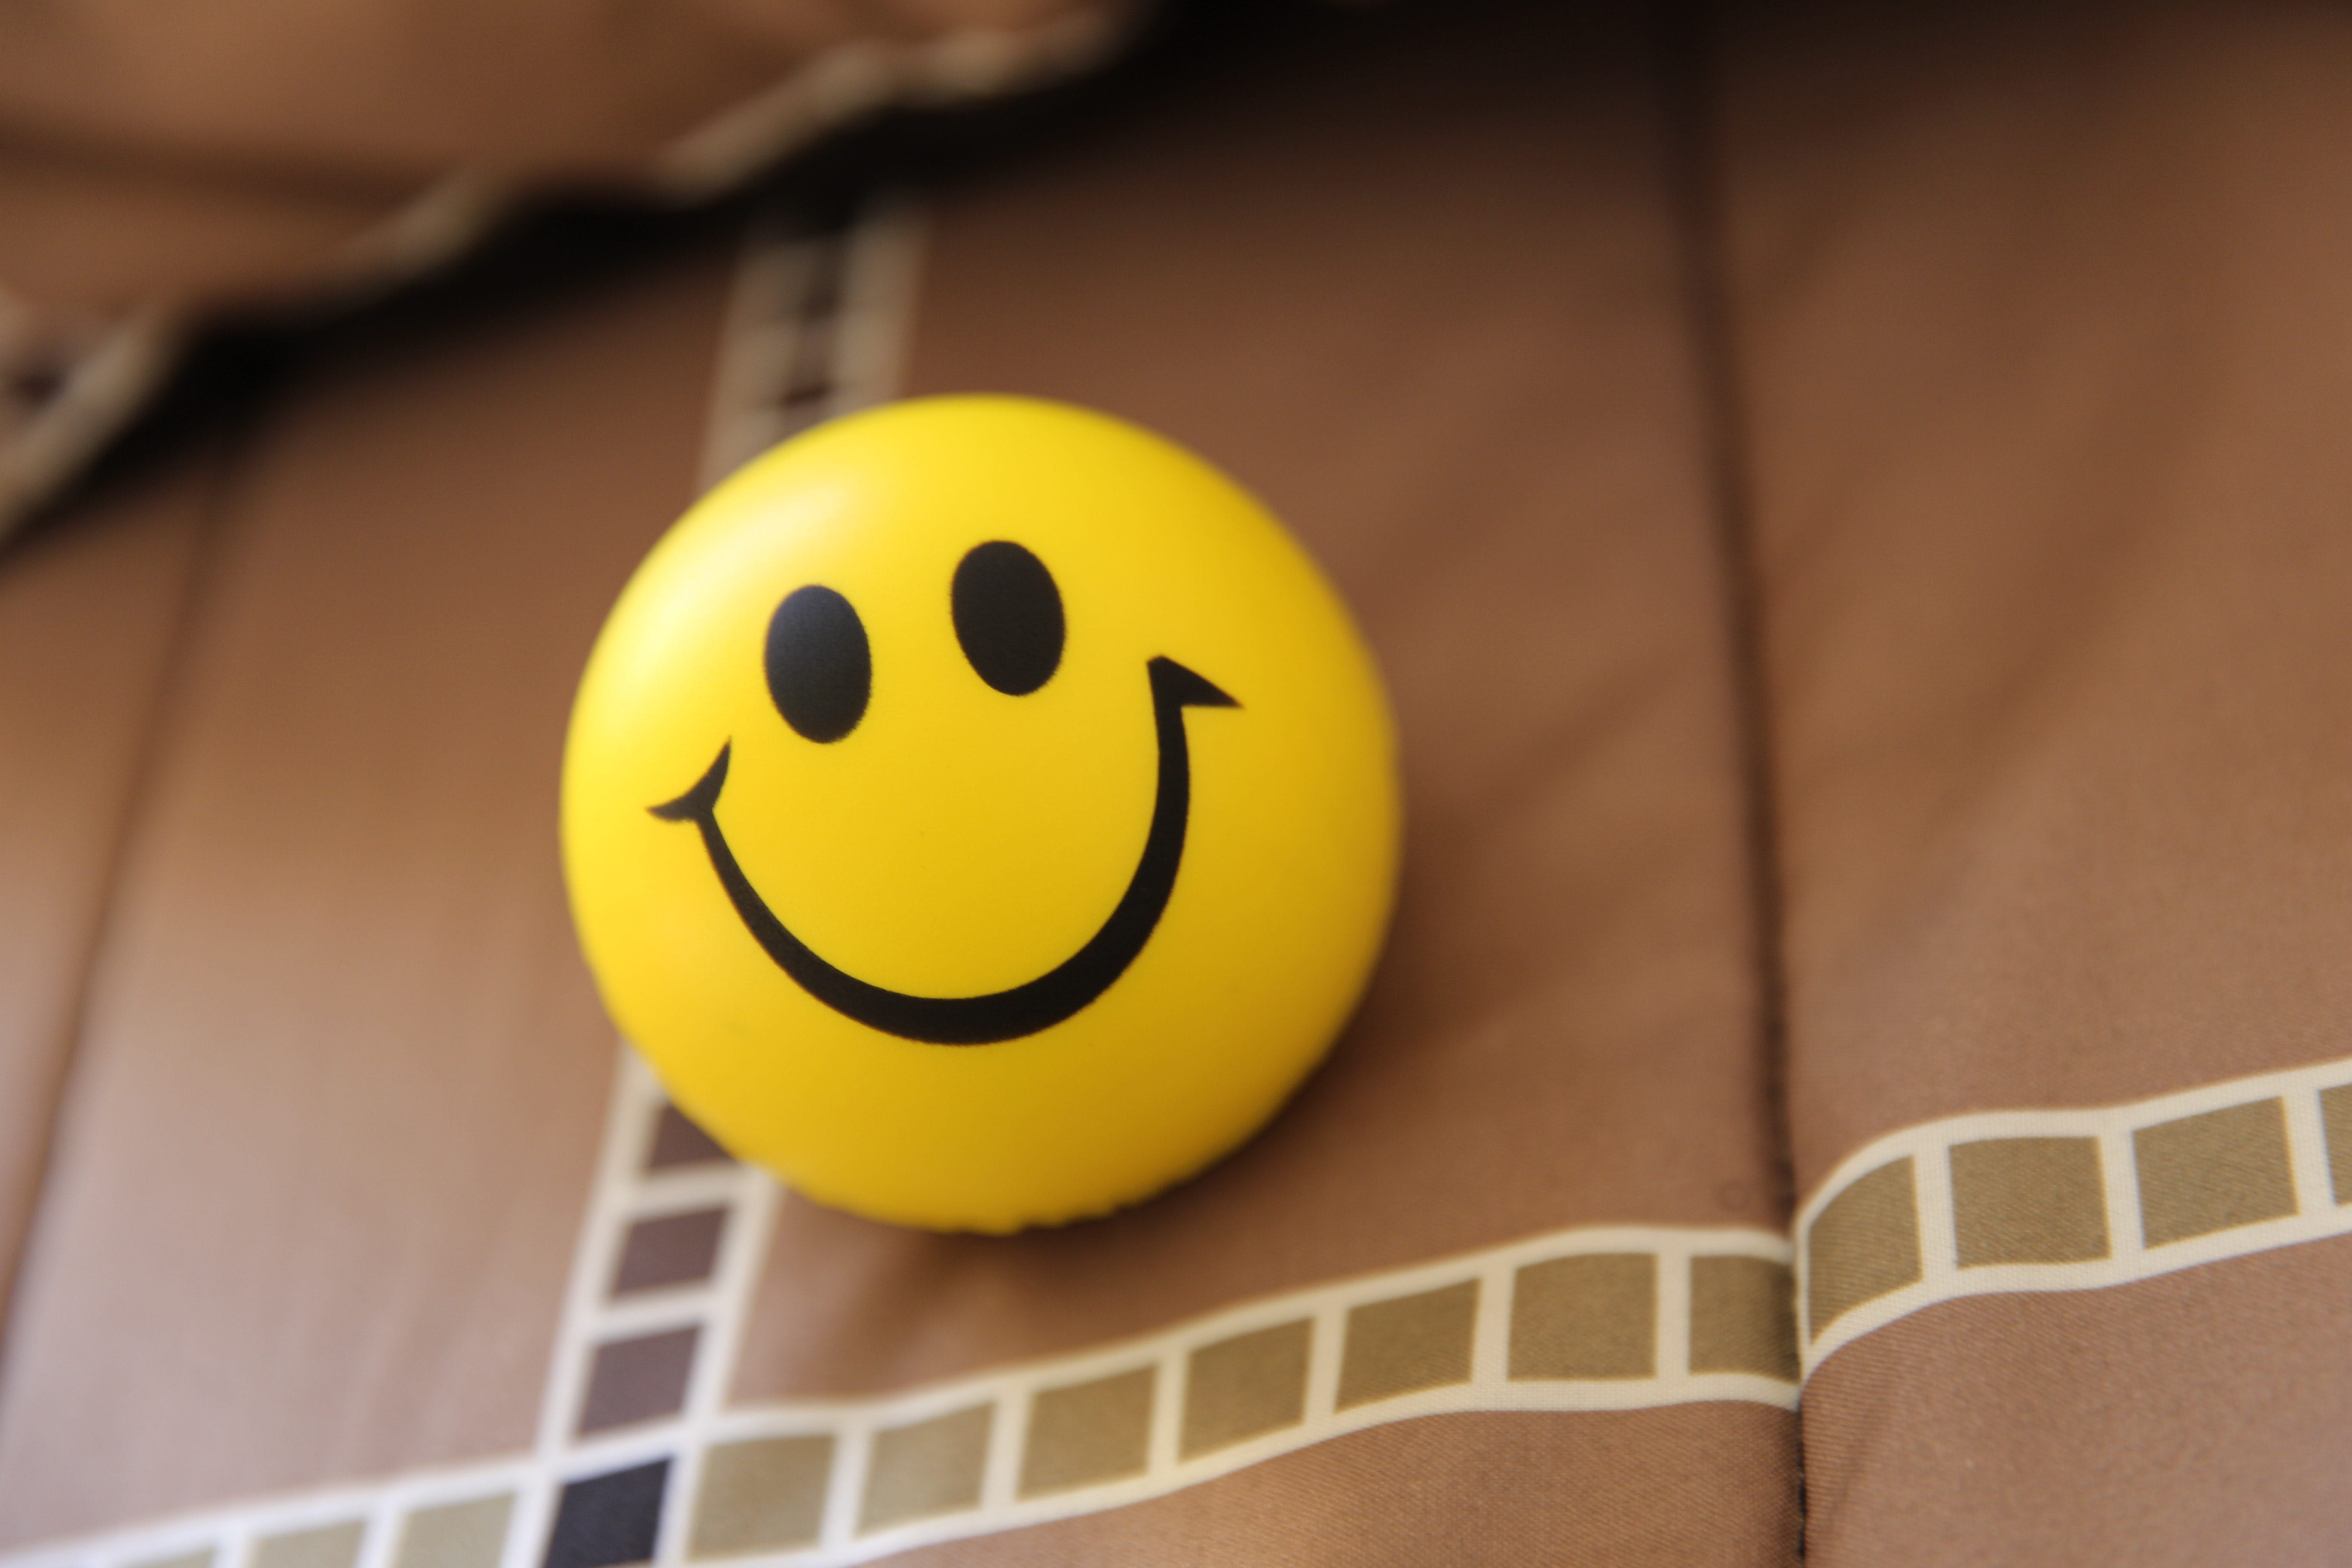 anthropomorphic smiley face, smiling, yellow, close-up, representation